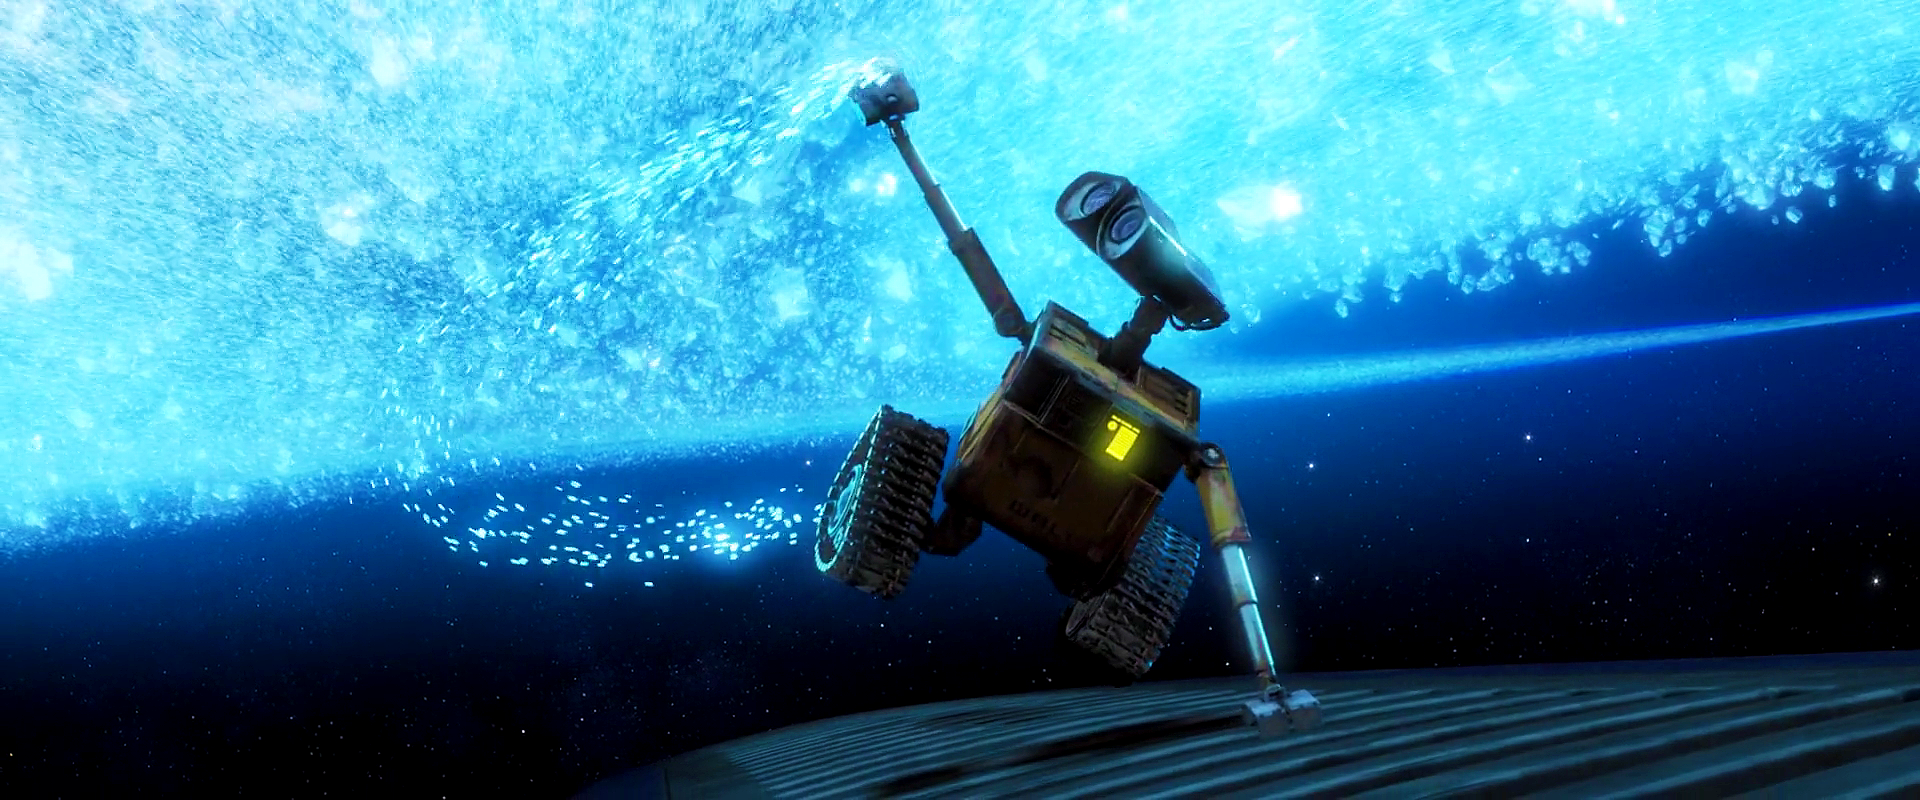 Wall E Turns 10 Today 10 Reasons Why Wall E Is One Of The Best Pixar Movies Upcoming Pixar